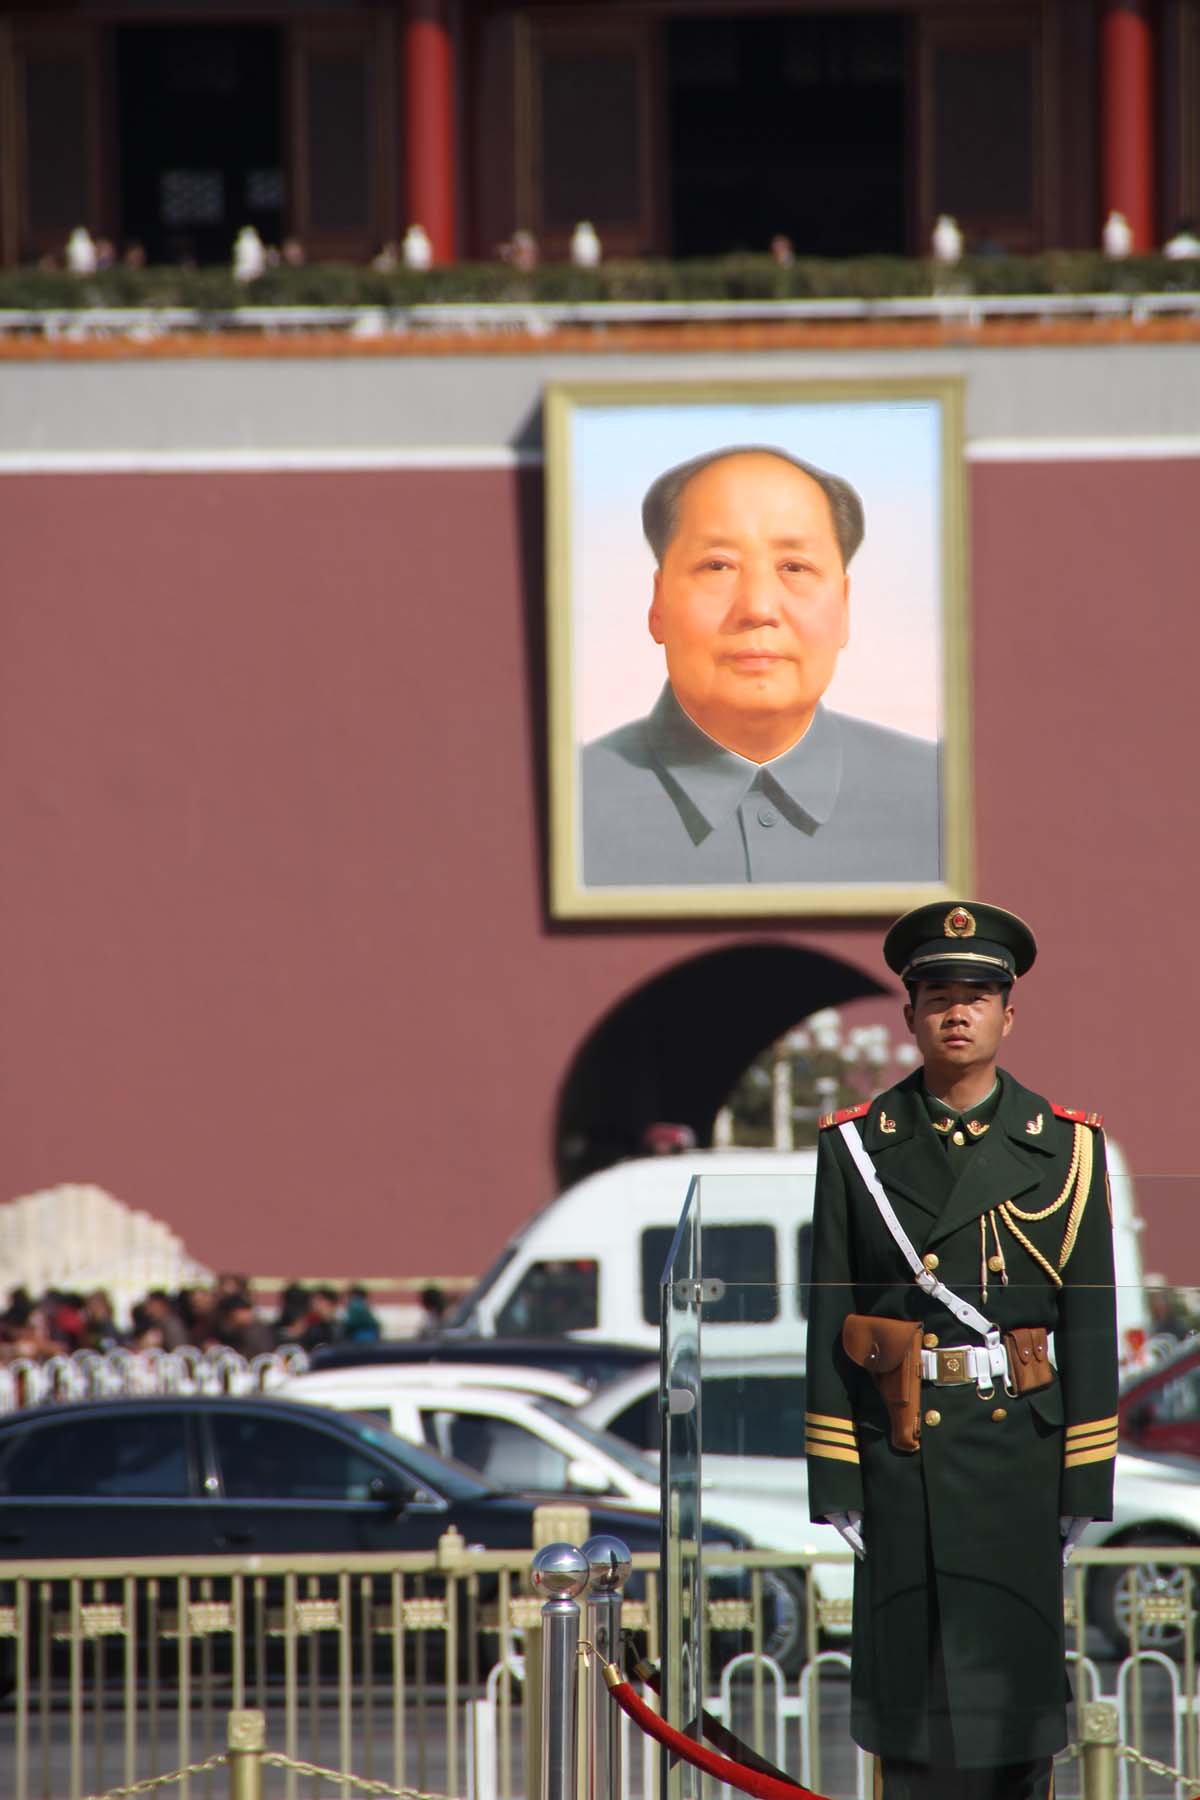 Soldier guarding the Tiananmen Tower and Mao Tse-tung.